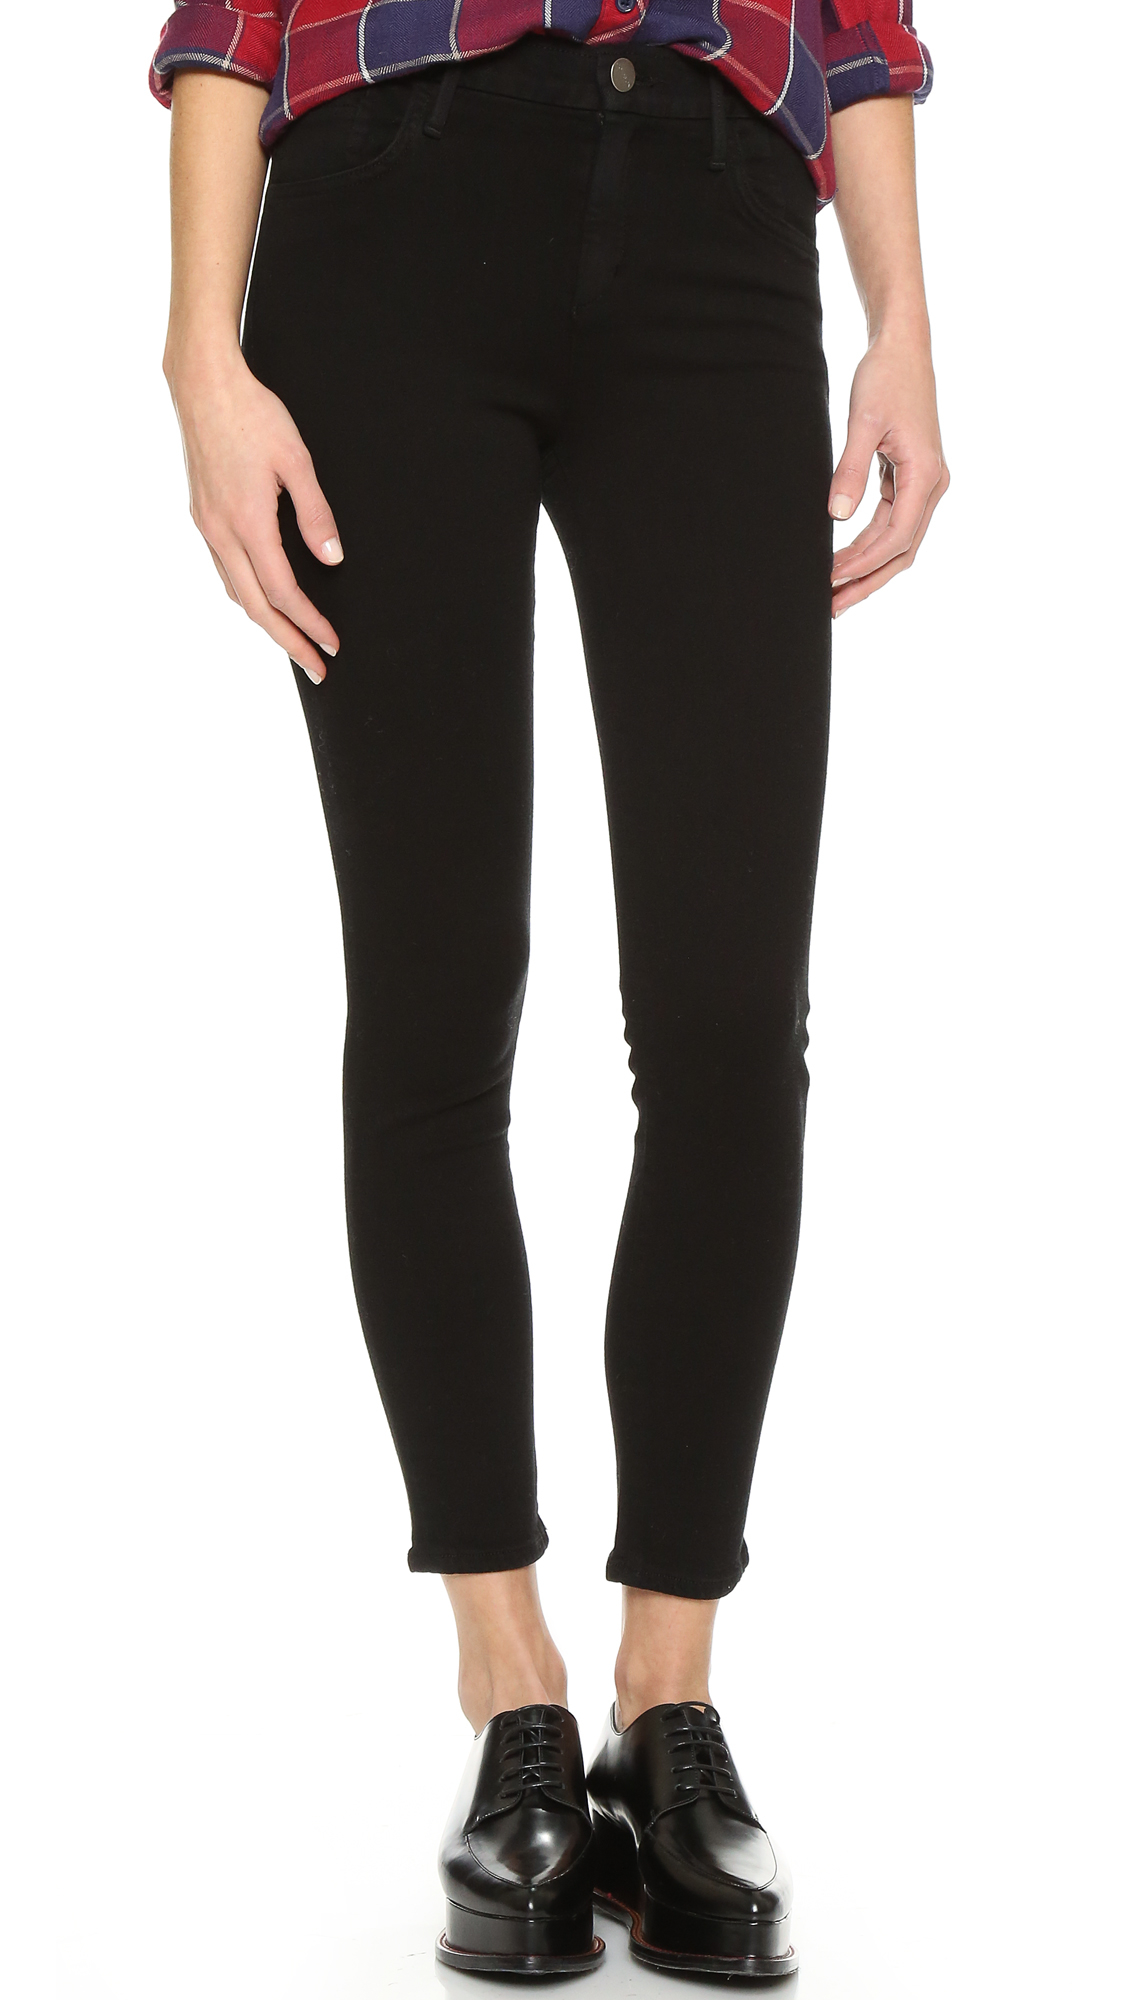 The Comfort high-rise bootcut jeans in black - Goldsign